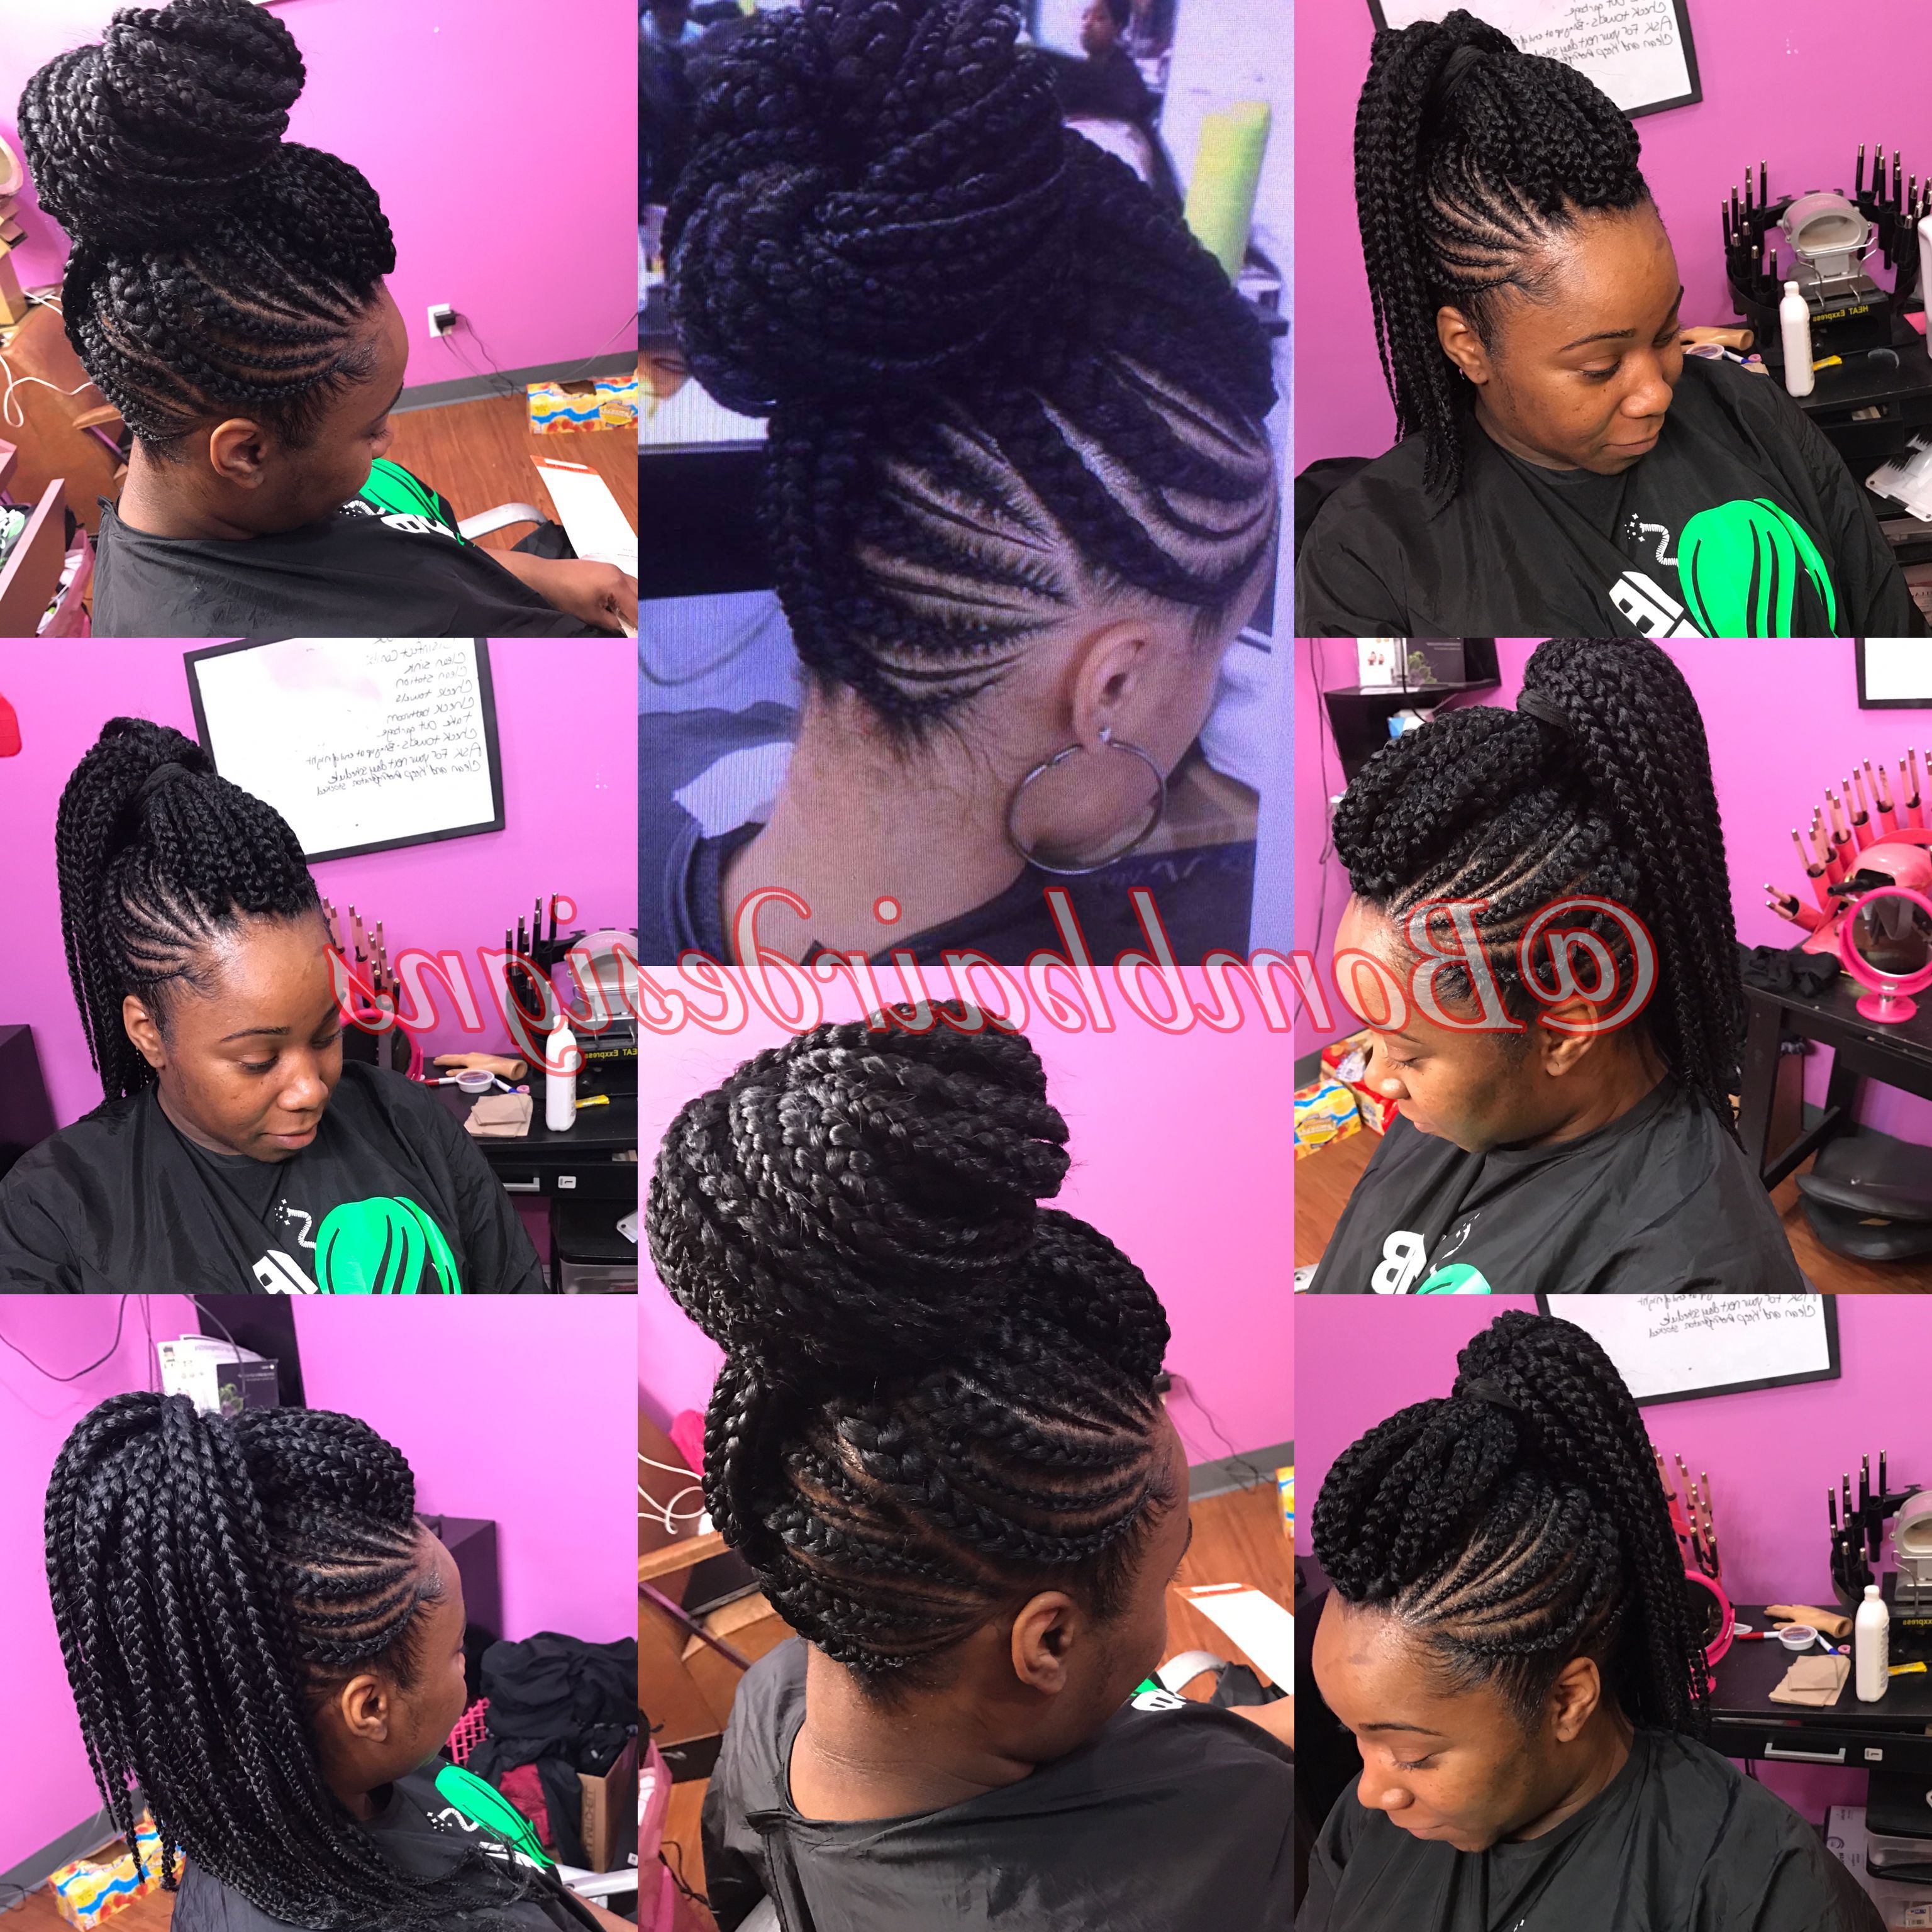 Widely Used Mohawk Under Braid Hairstyles Regarding Hairstyles : Chic Braided Hairstyles Marvellous Feeder (View 16 of 20)